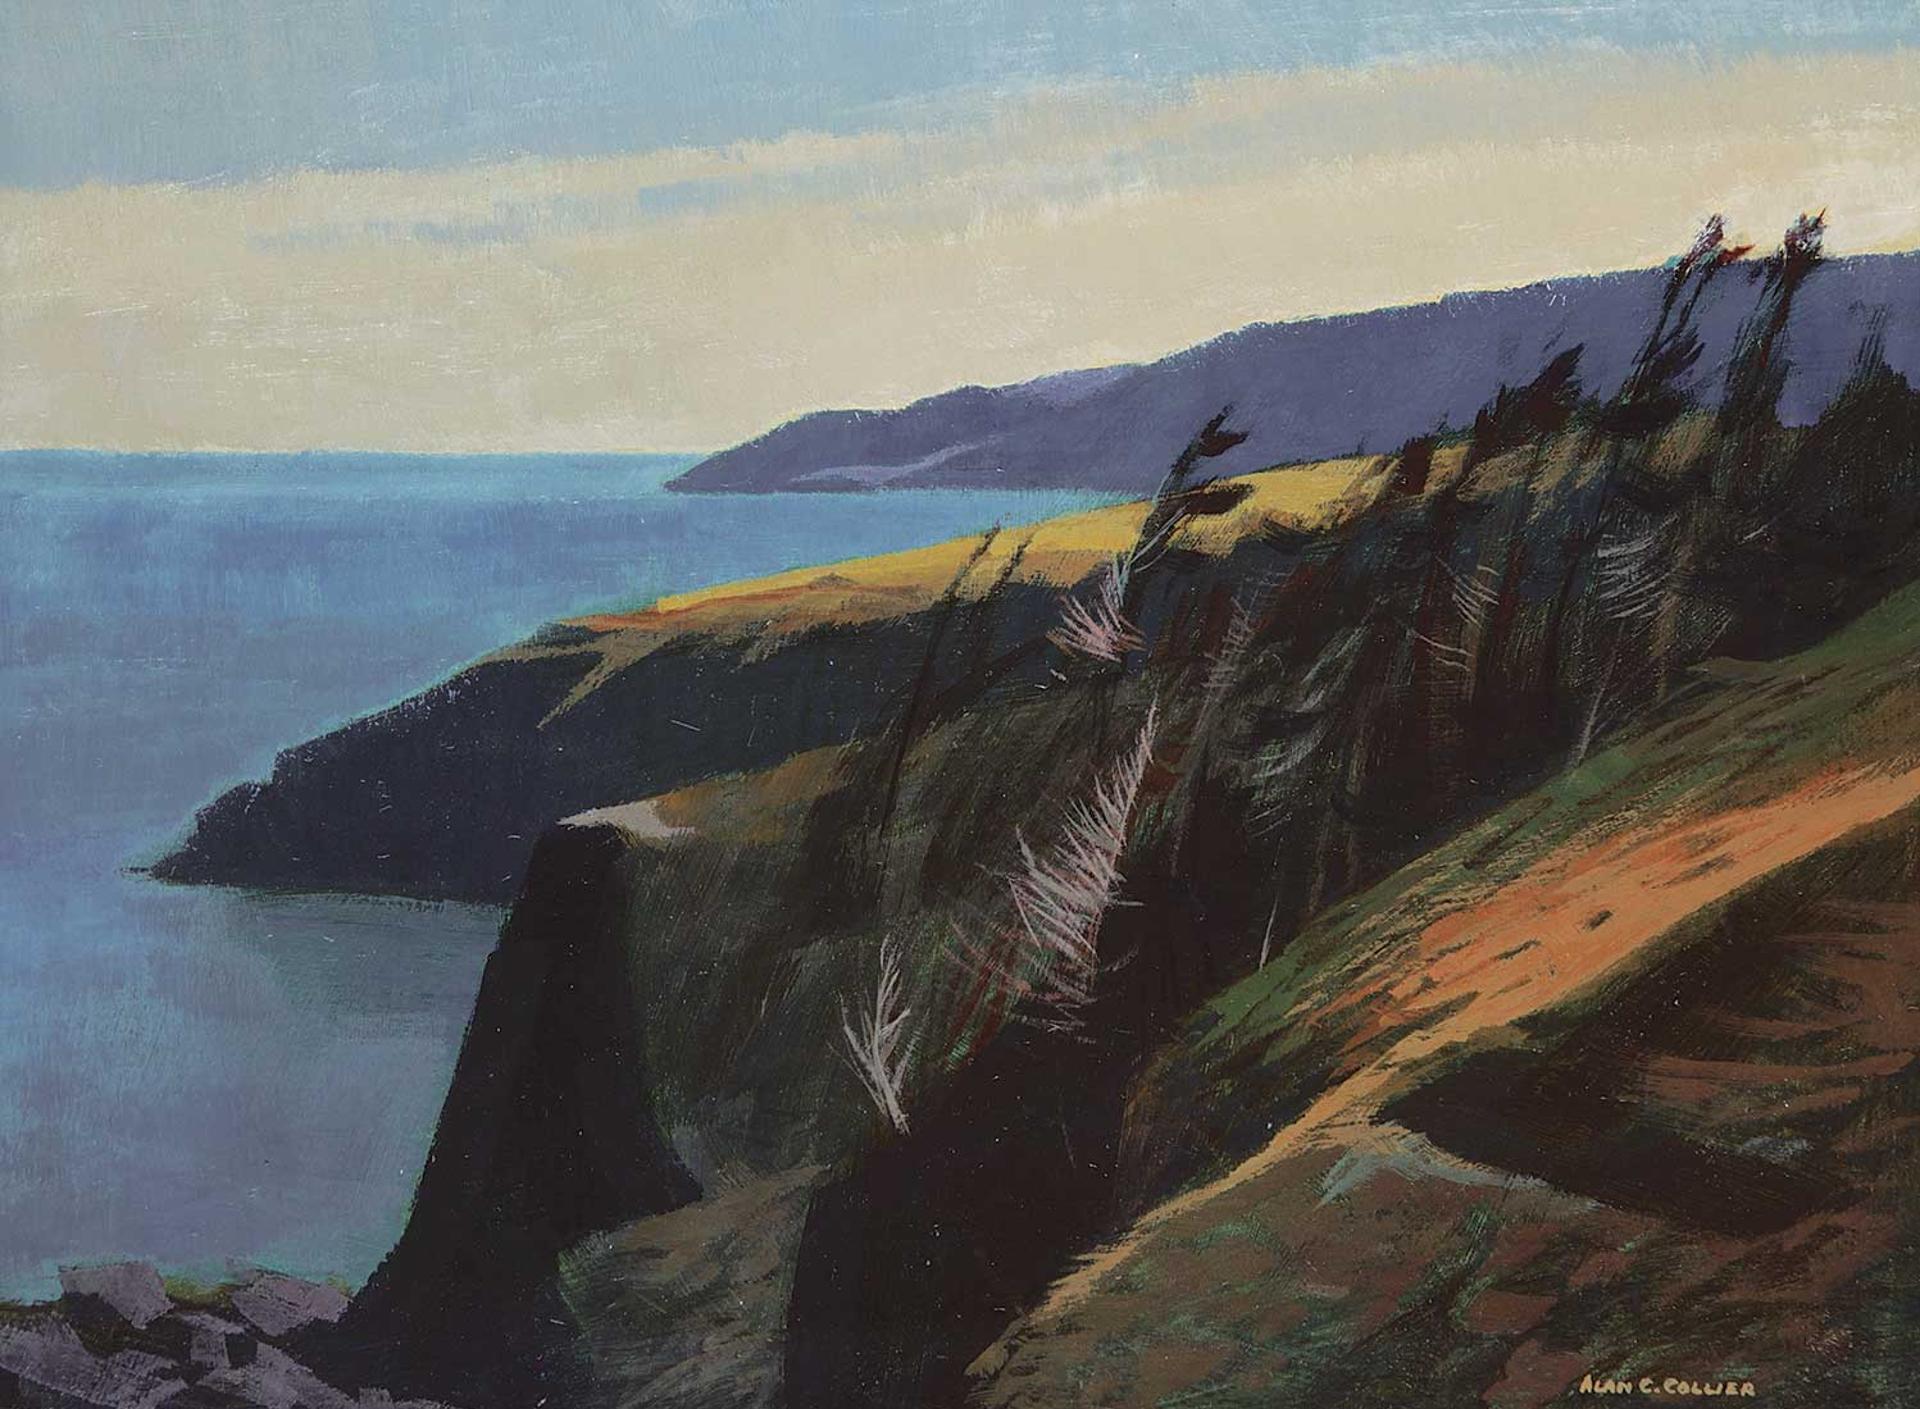 Alan Caswell Collier (1911-1990) - Middle Cove, North of St. John's, Newfoundland